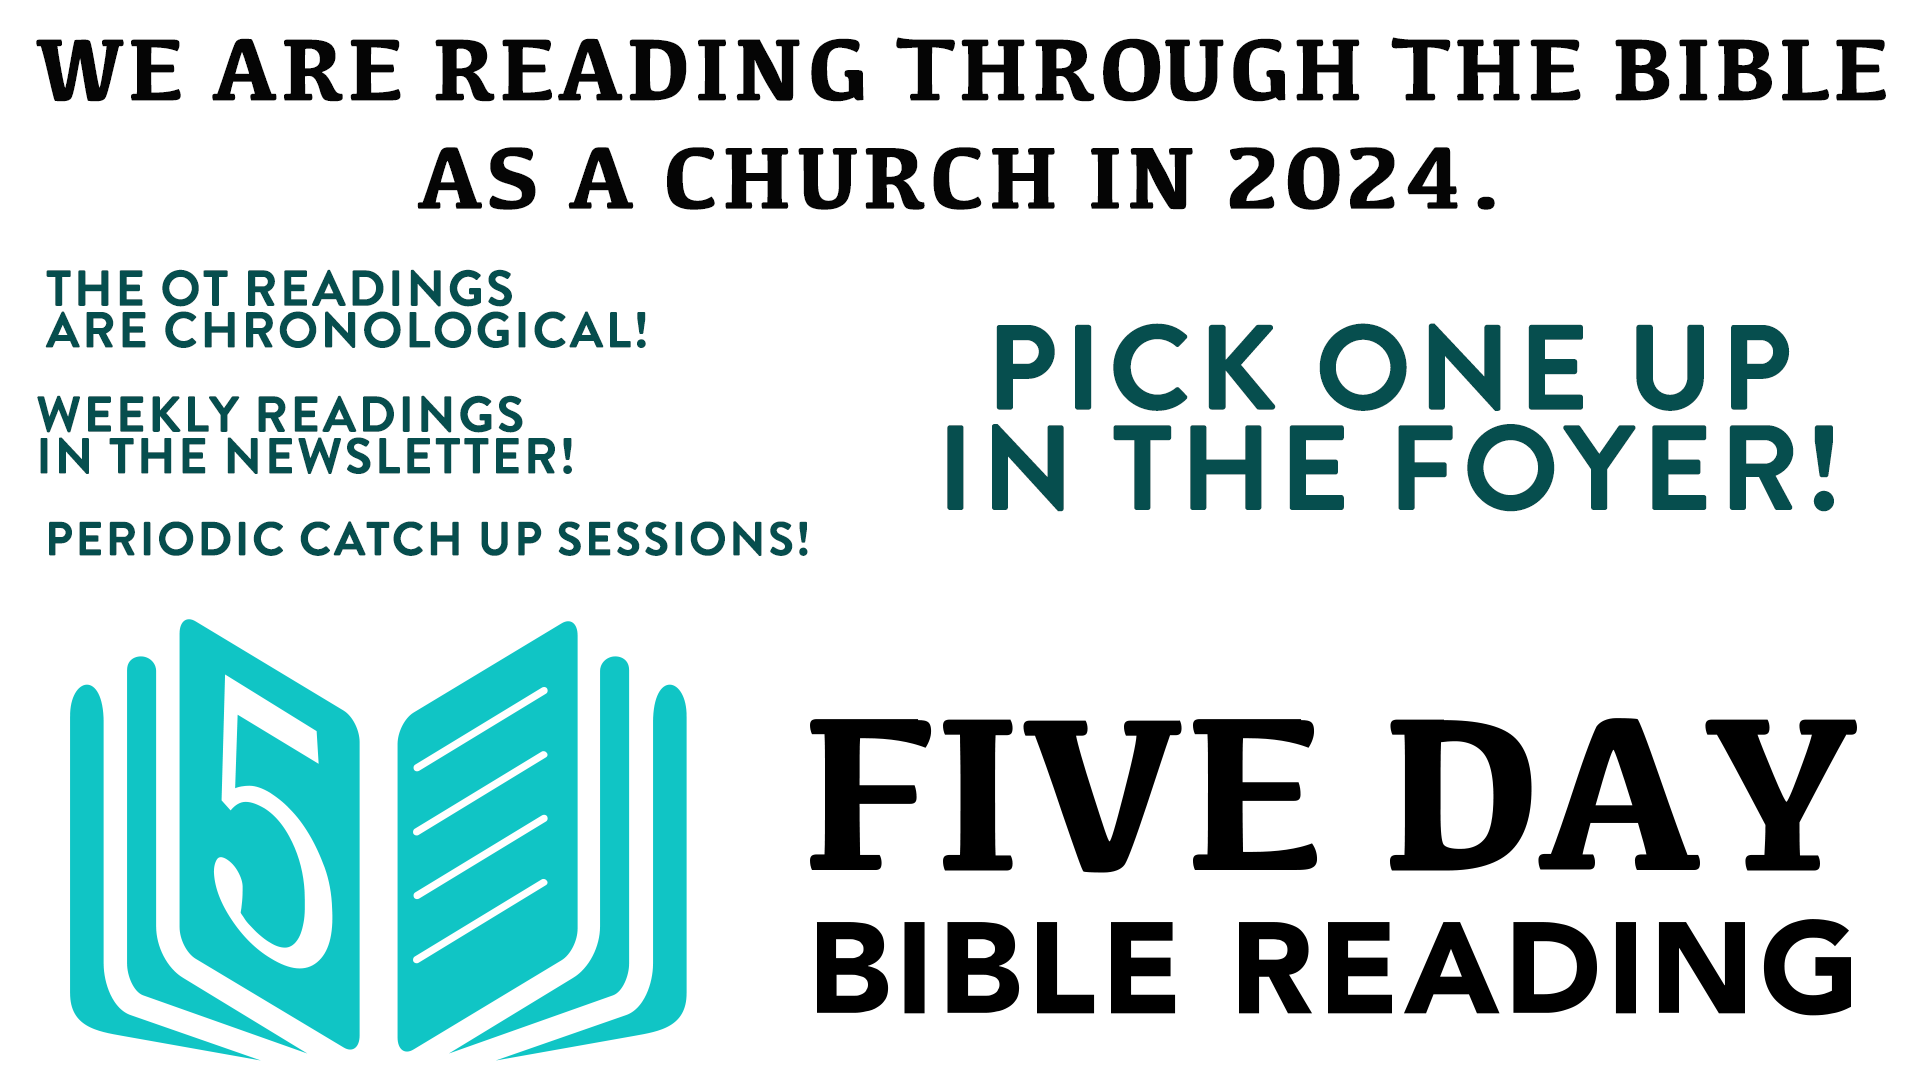 Read through the Bible in 2024!